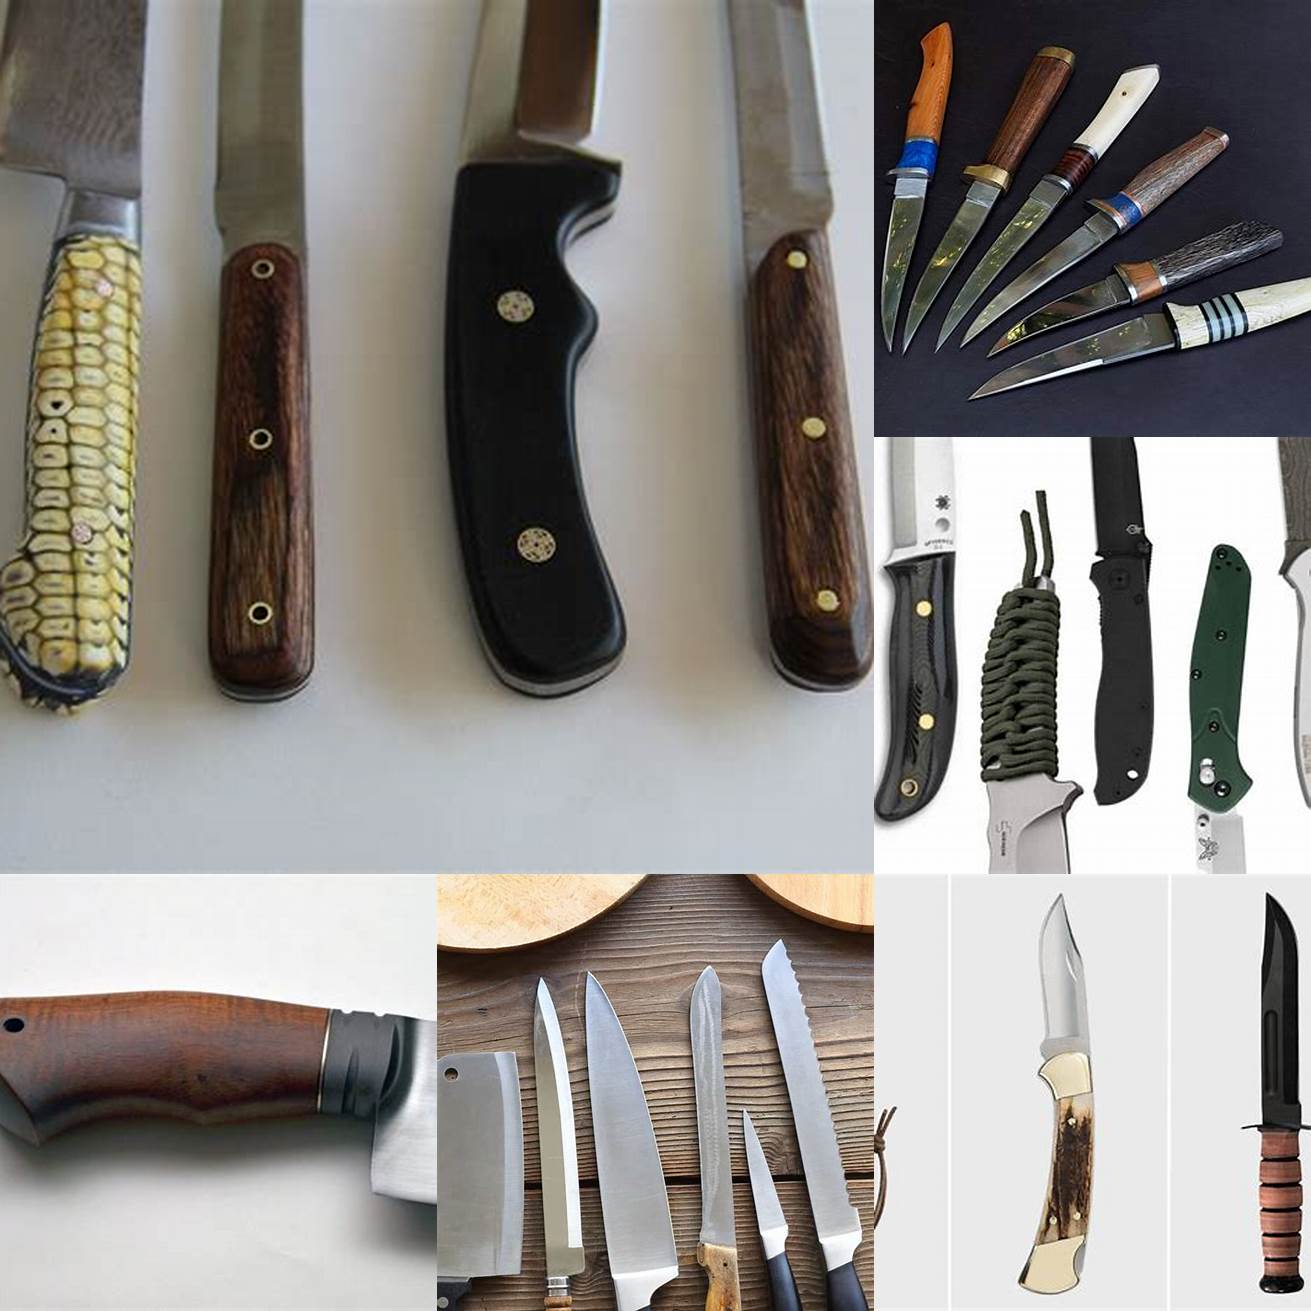 6 Knife handles with different materials